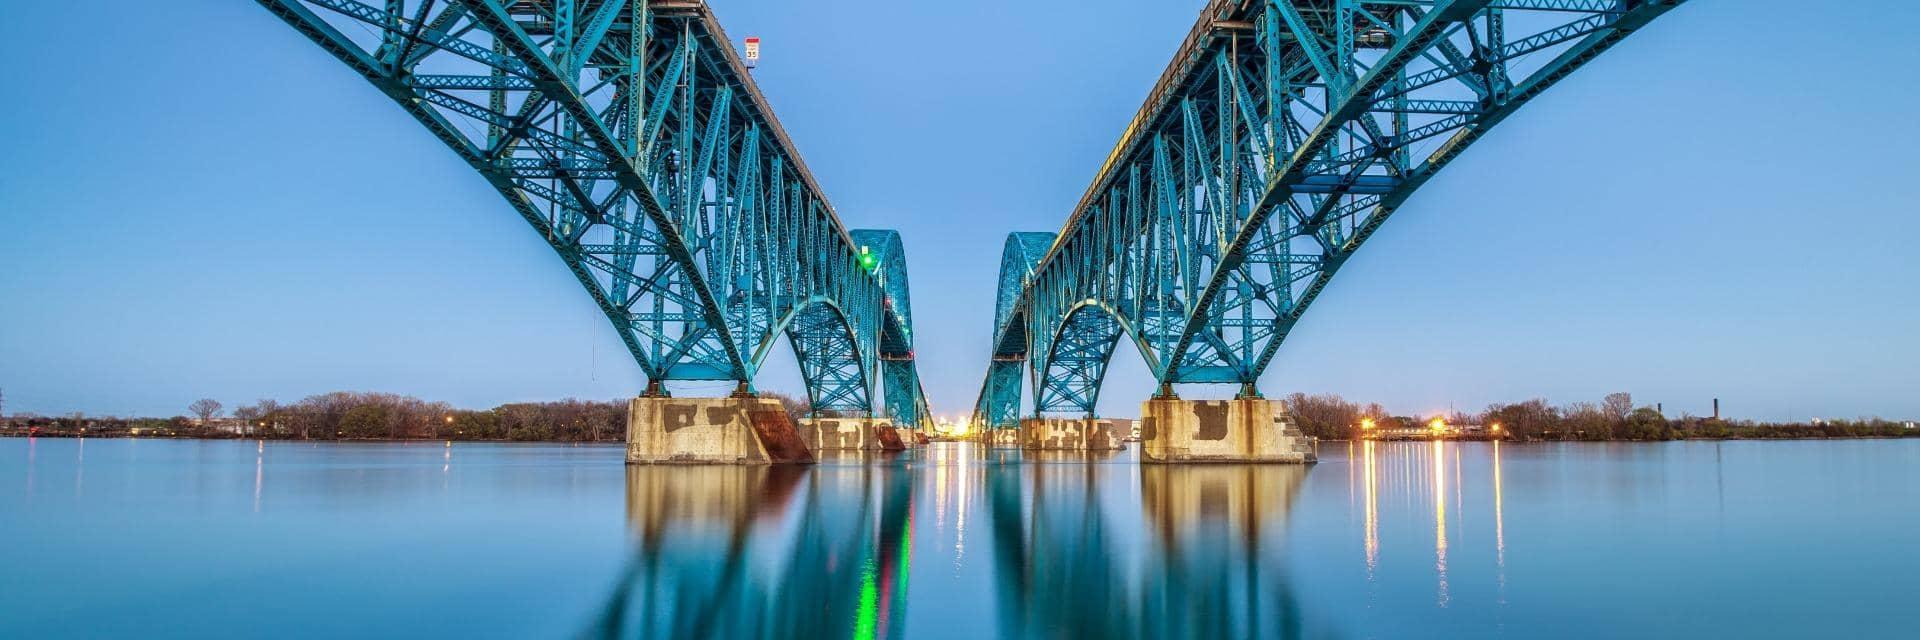 The South Grand Island bridge in New York. The Barclays regional heads reveal their outlook for 2022